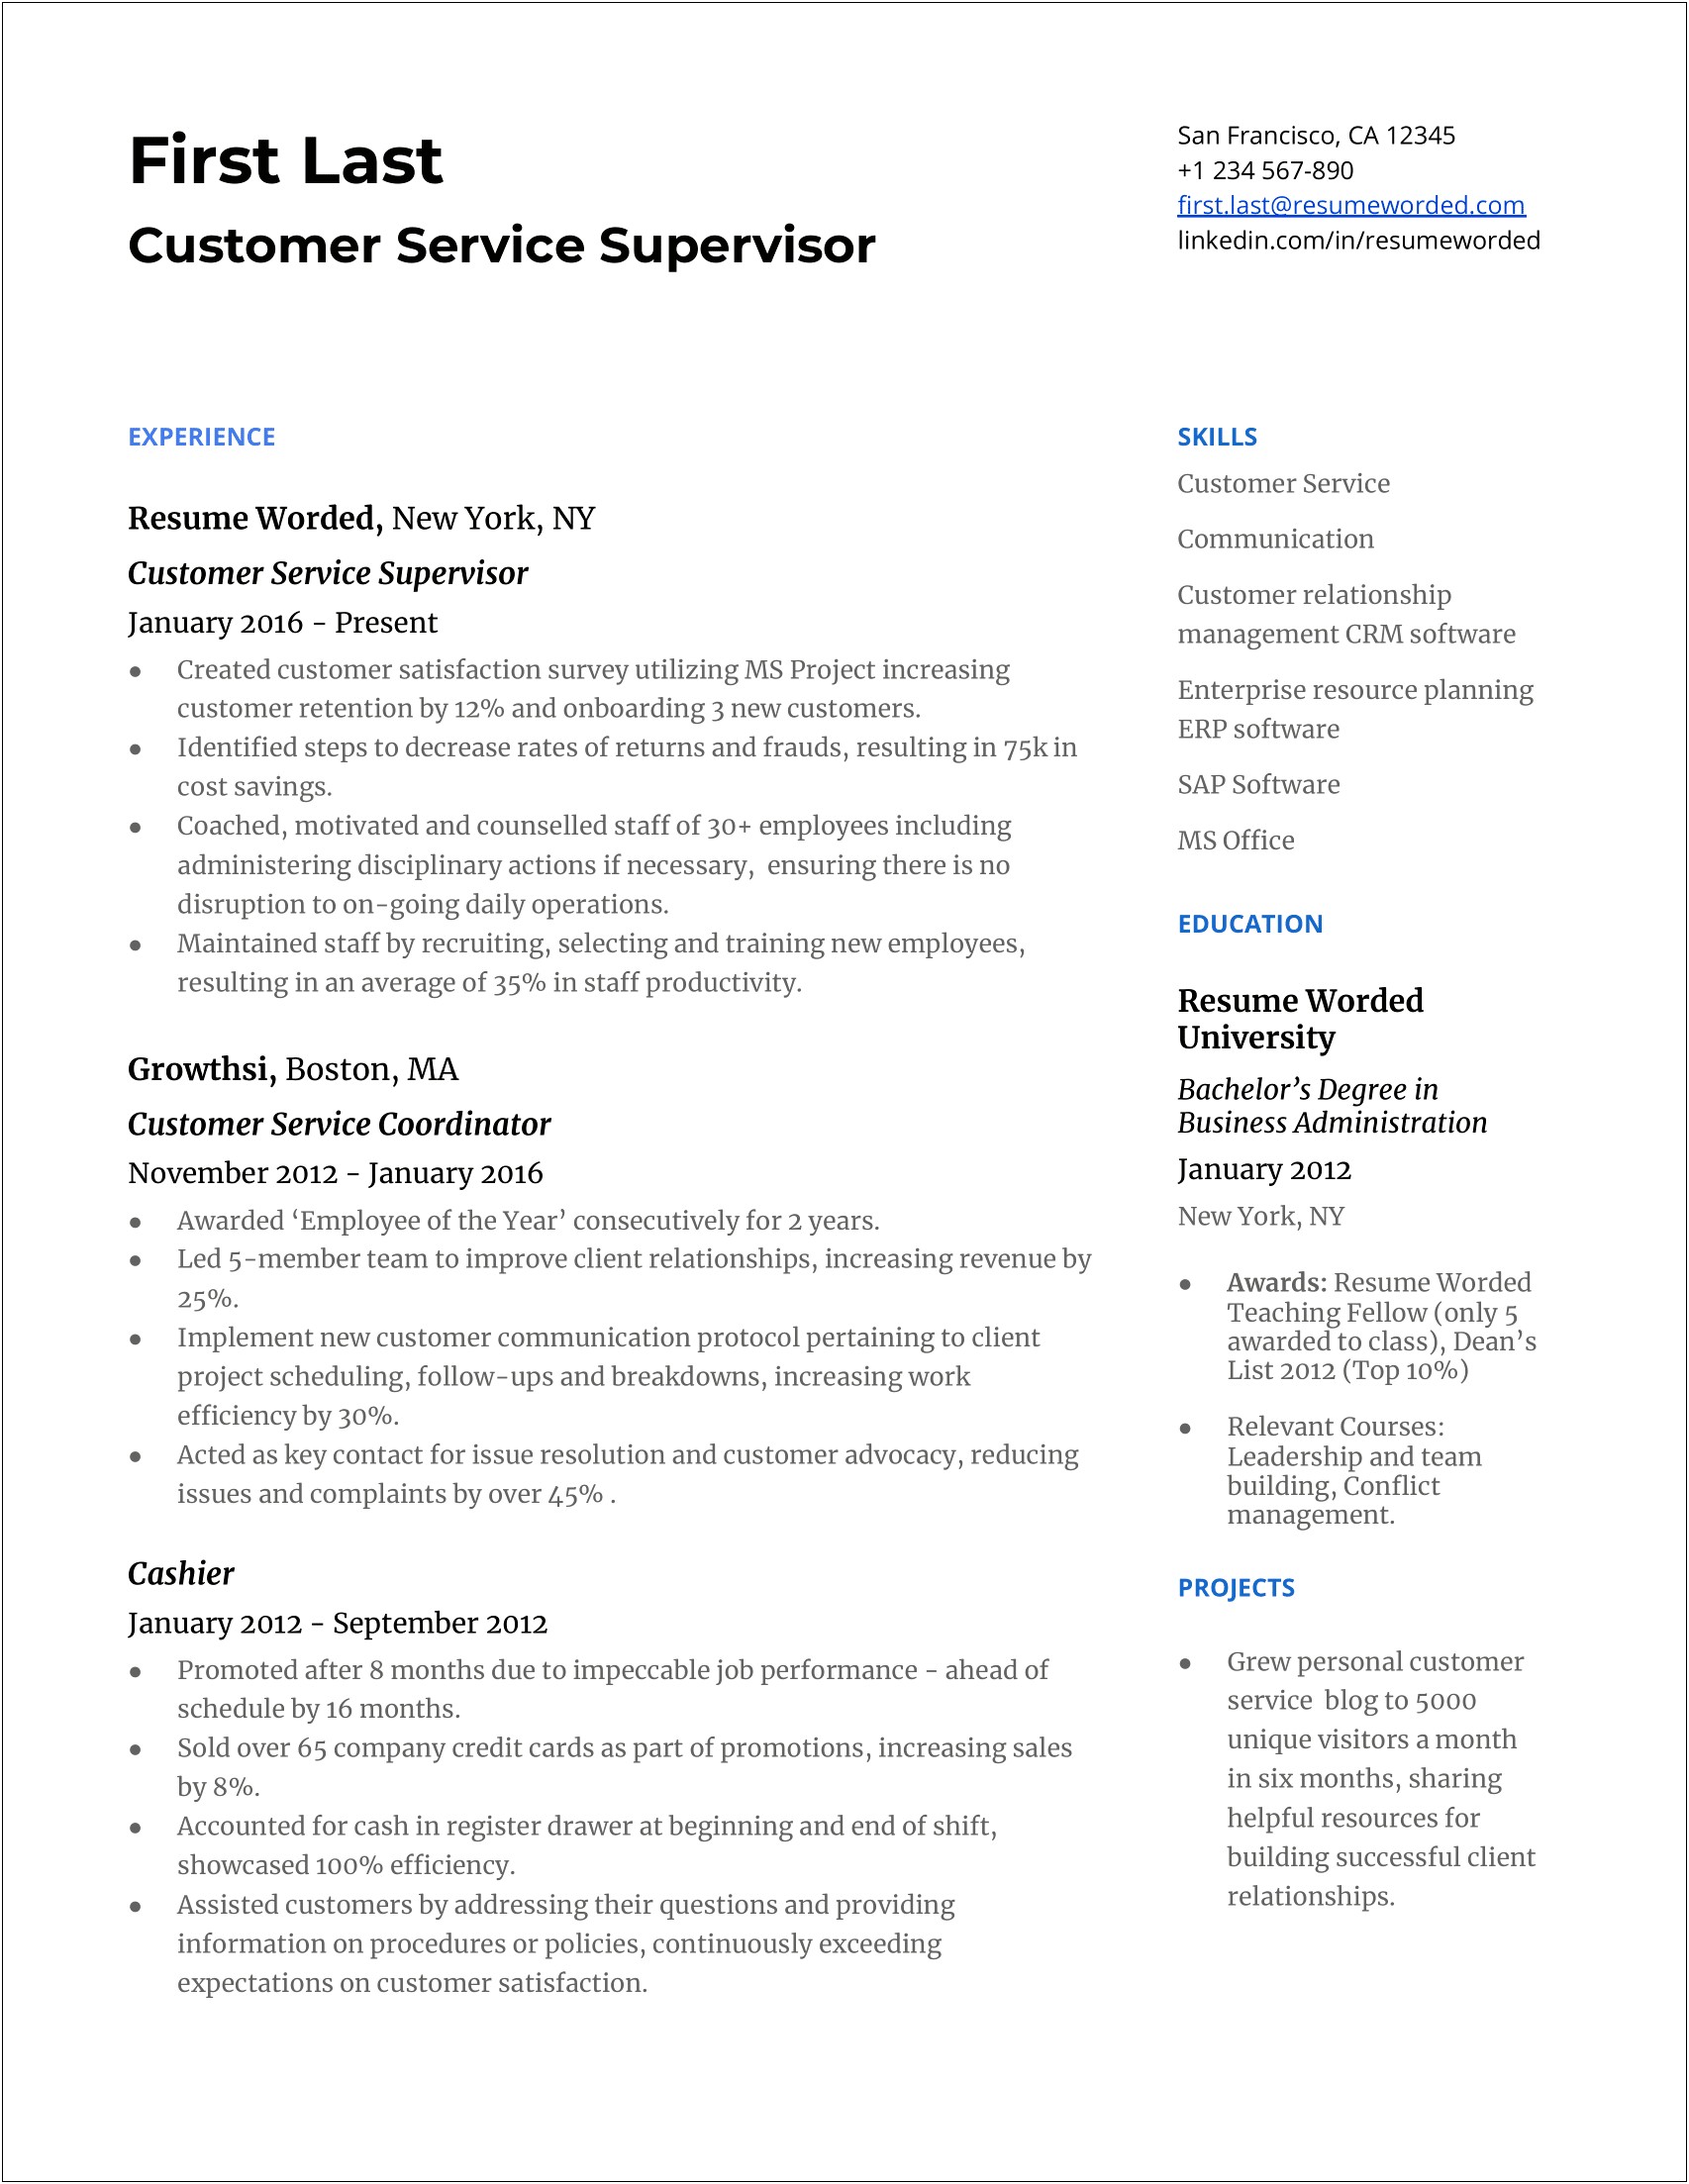 Professional Resume Customer Service Manager Example